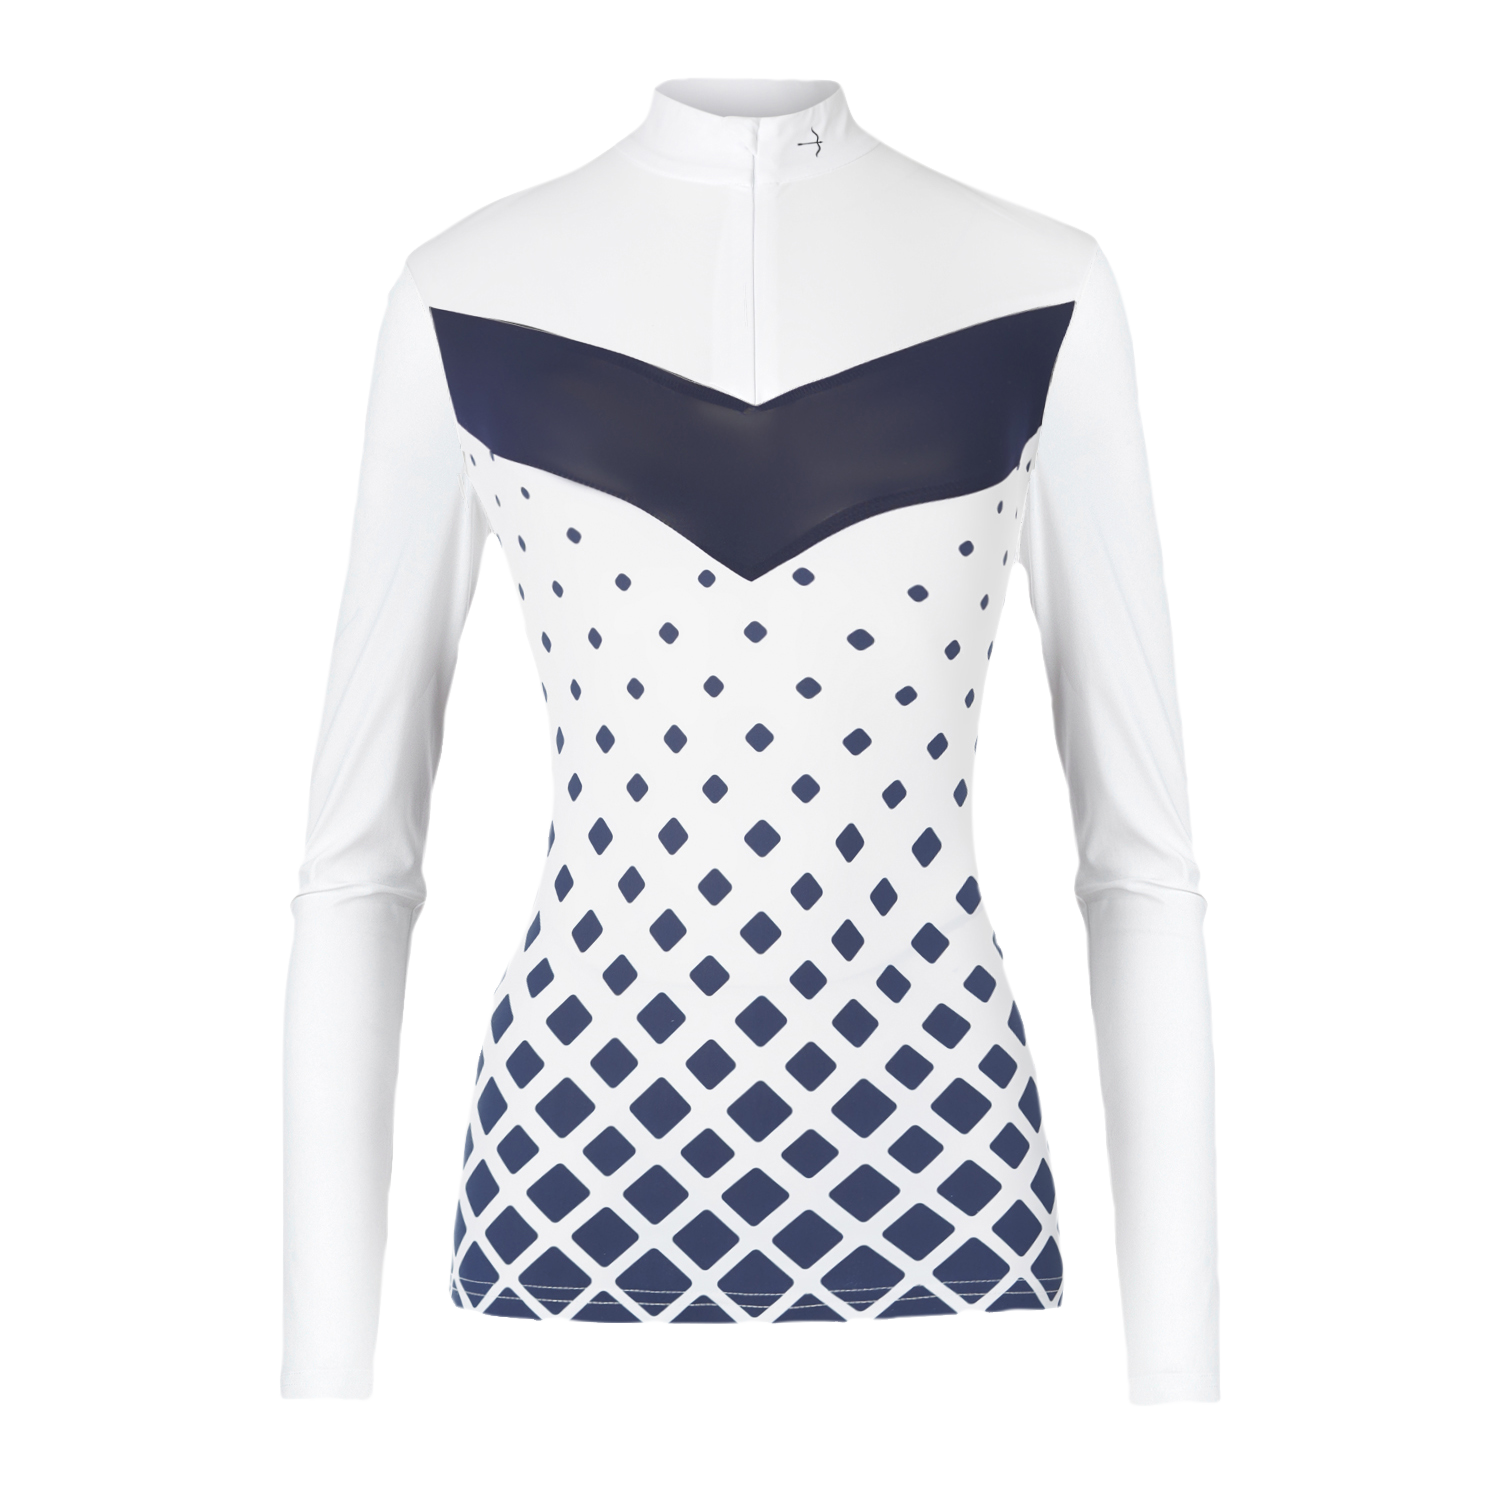 The Vivian Graffic Laguso long sleeve show shirt is perfect for any discipline. The Show shirt has a sporty yet elegant look.  The shirt is made from breathable luxury but stretch jersey, a graduated Graffic print to the front with a zip and cover front opening.    Machine washable at 30’